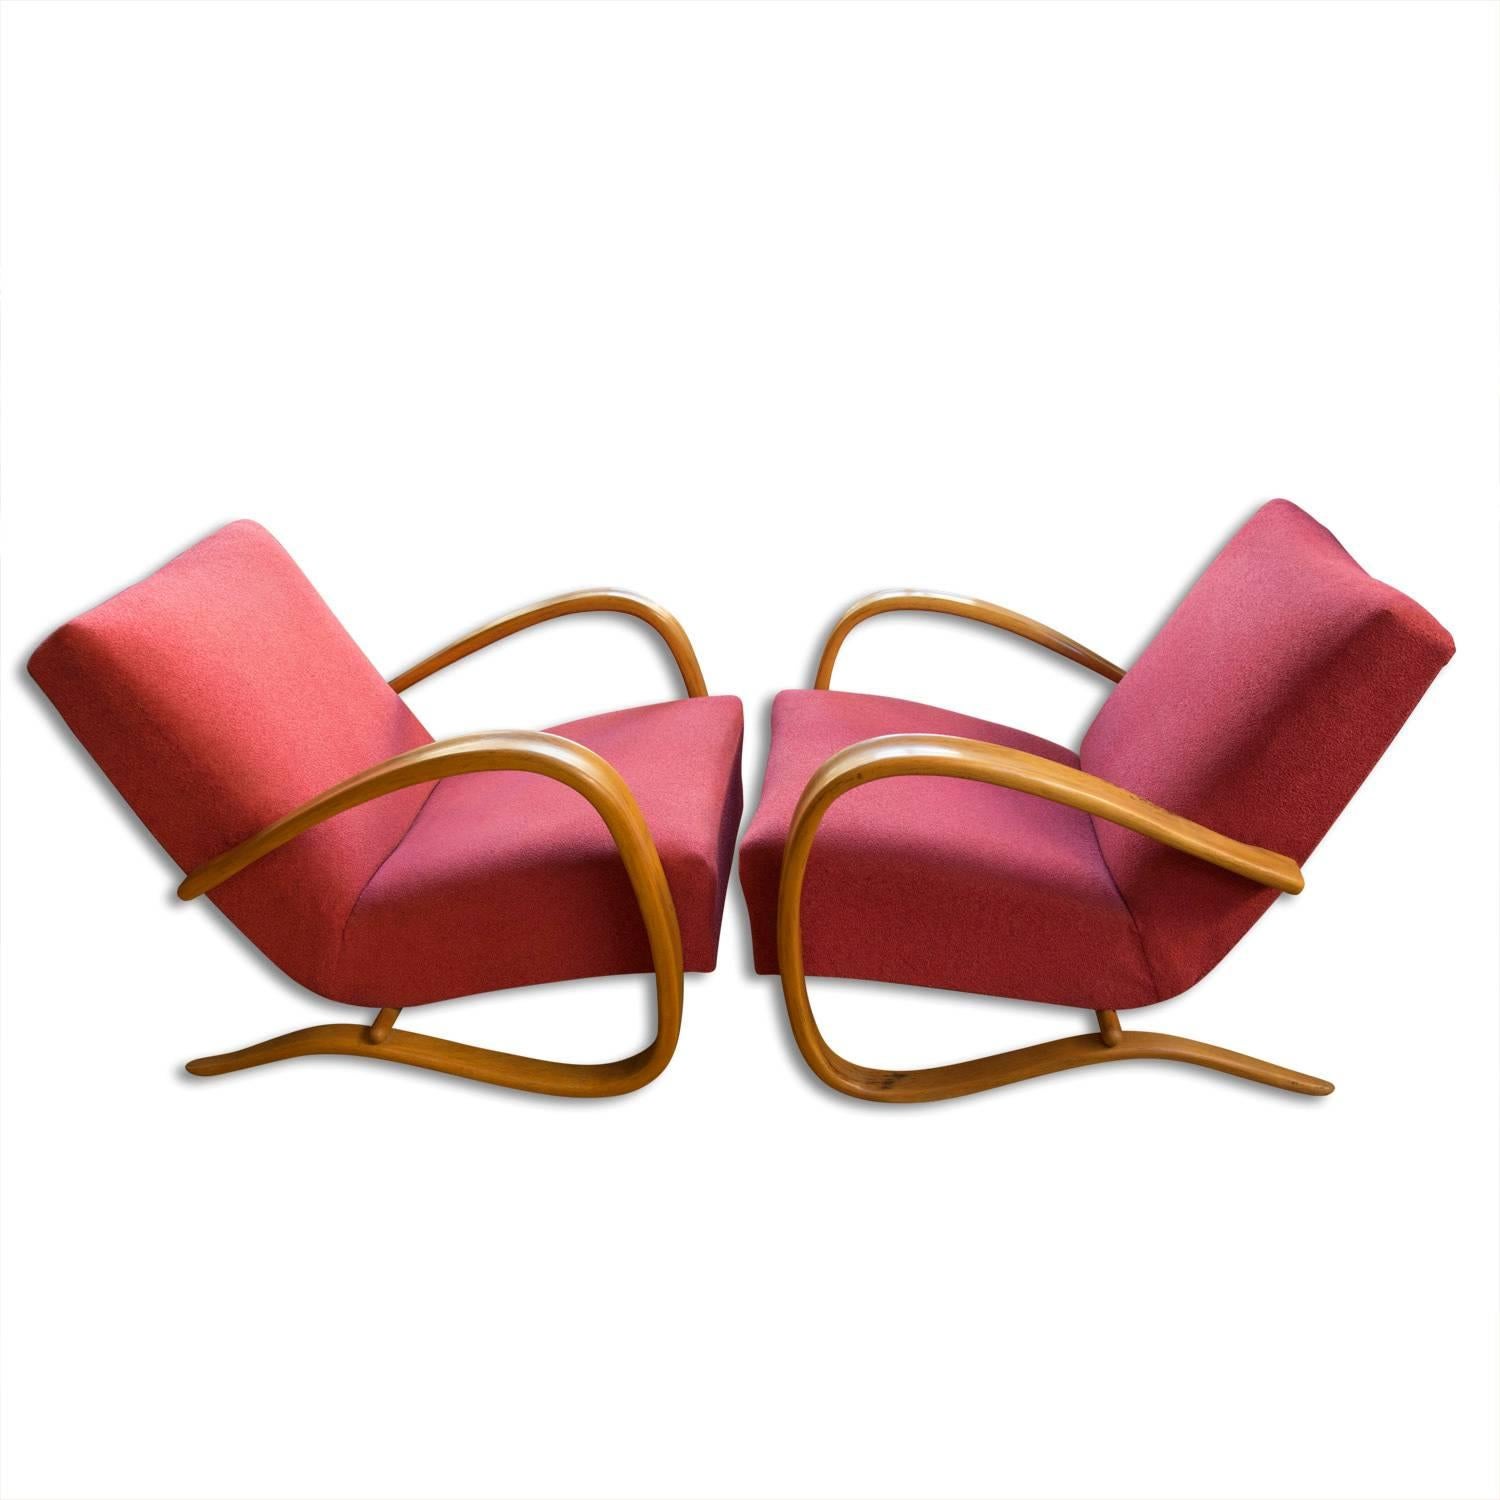 Art Deco Pair of H-269 Armchairs Designed by Jindrich Halabala for UP Závody Brno